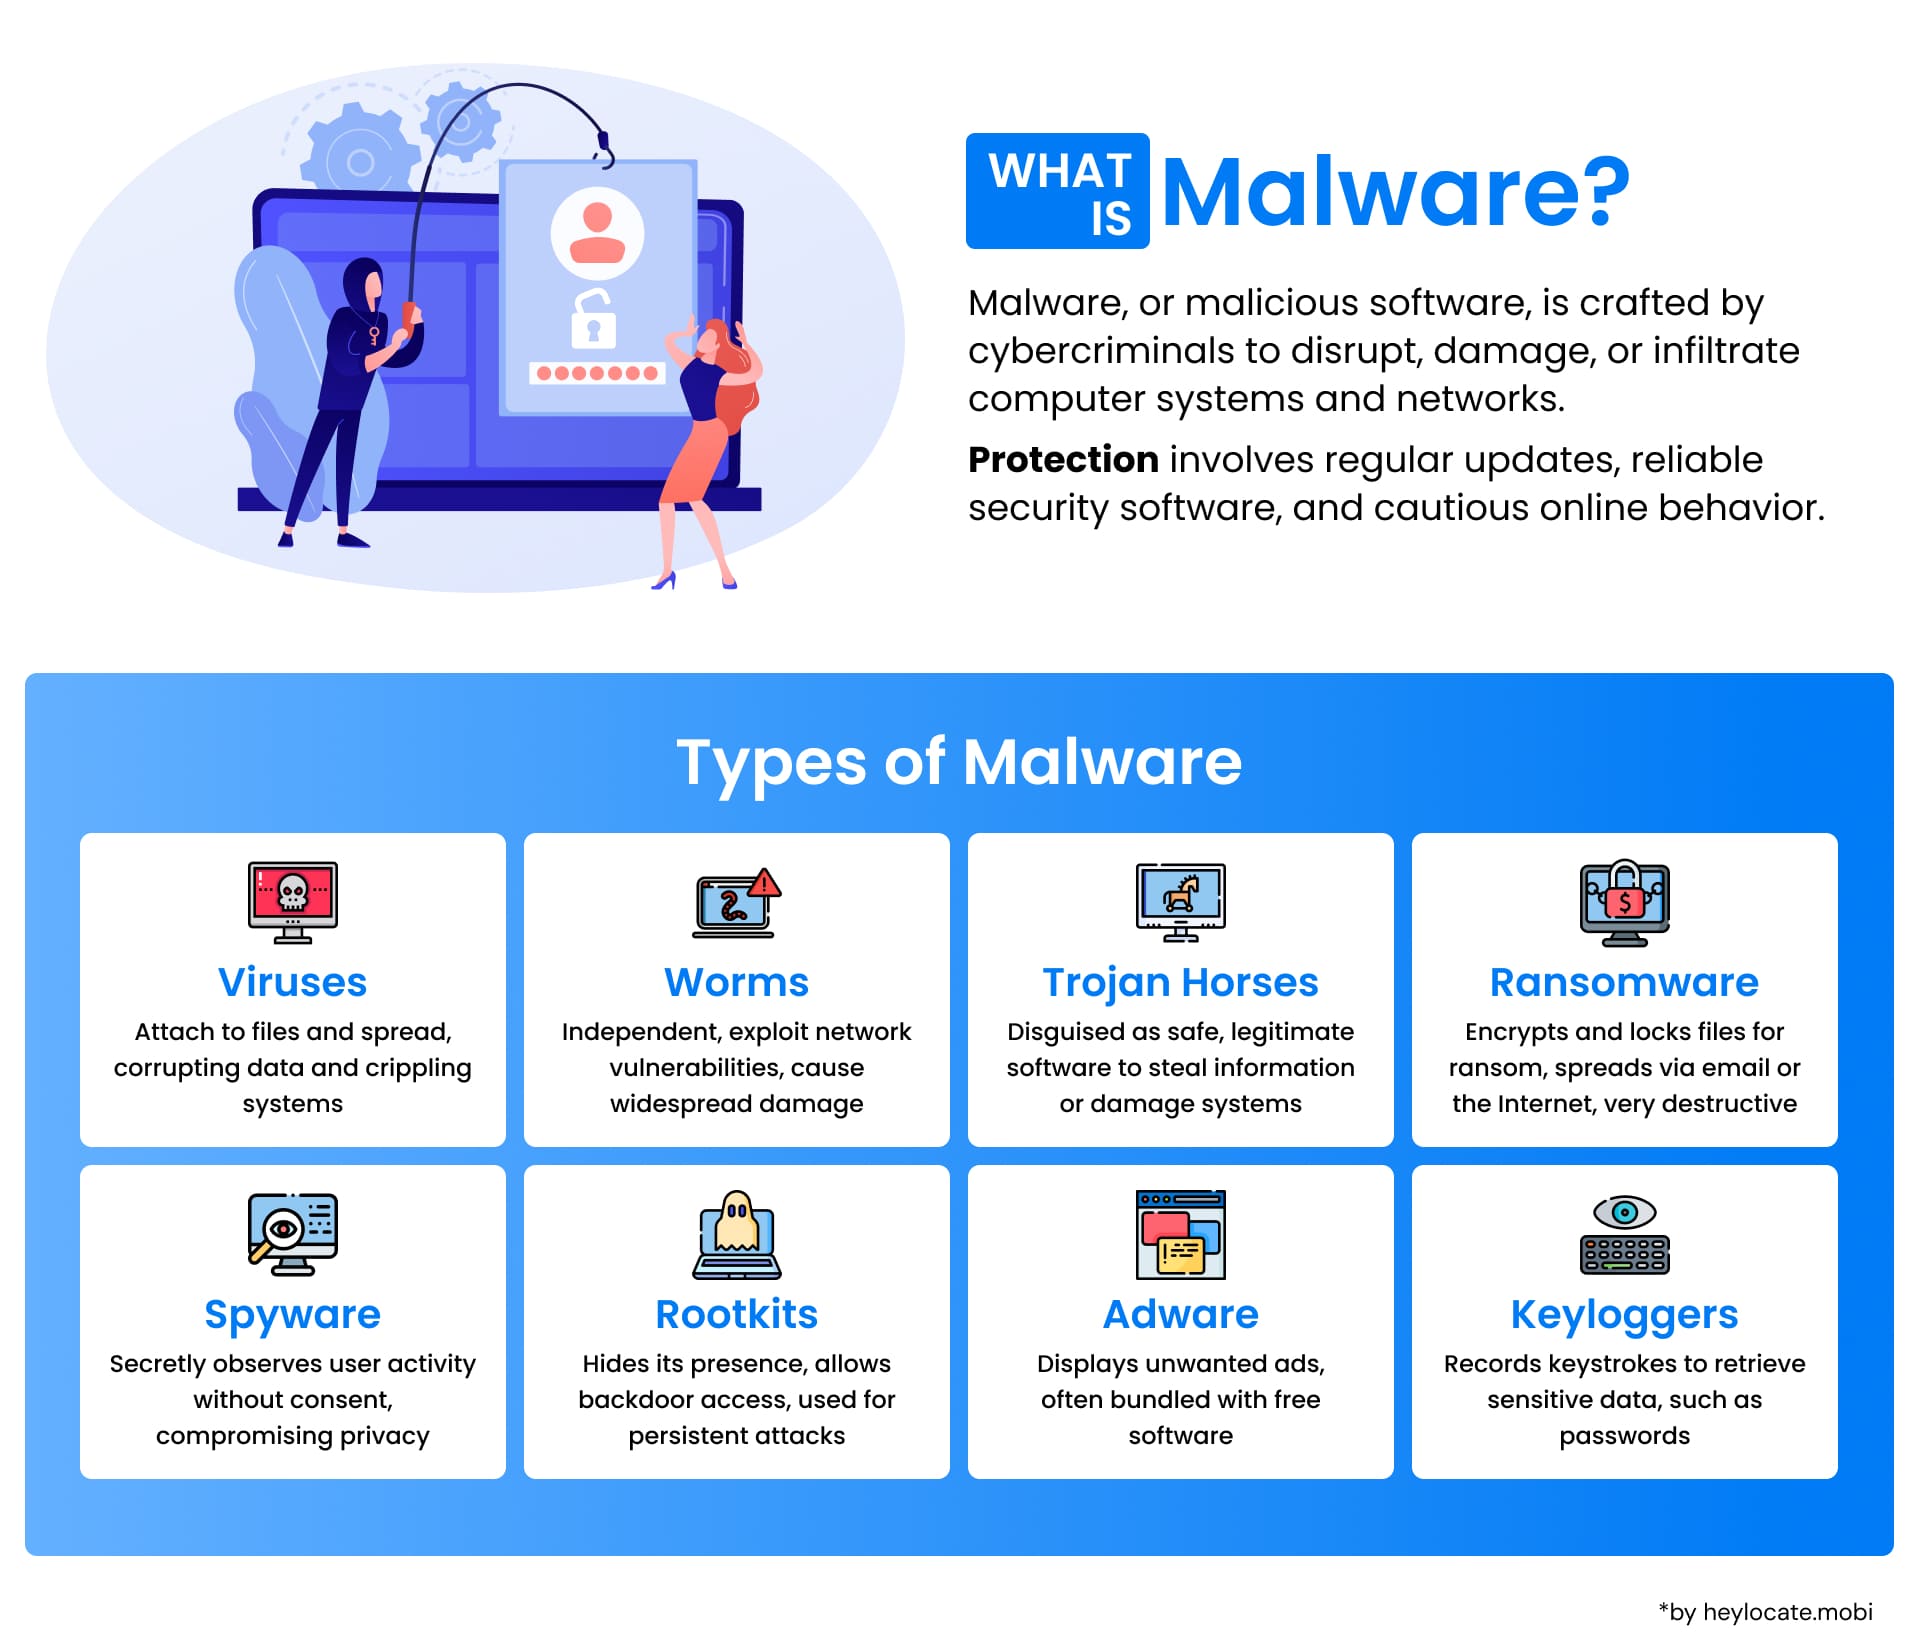 An informative graphic depicting what malware is, different types of malware, including viruses, worms, and ransomware, and their impact on cybersecurity